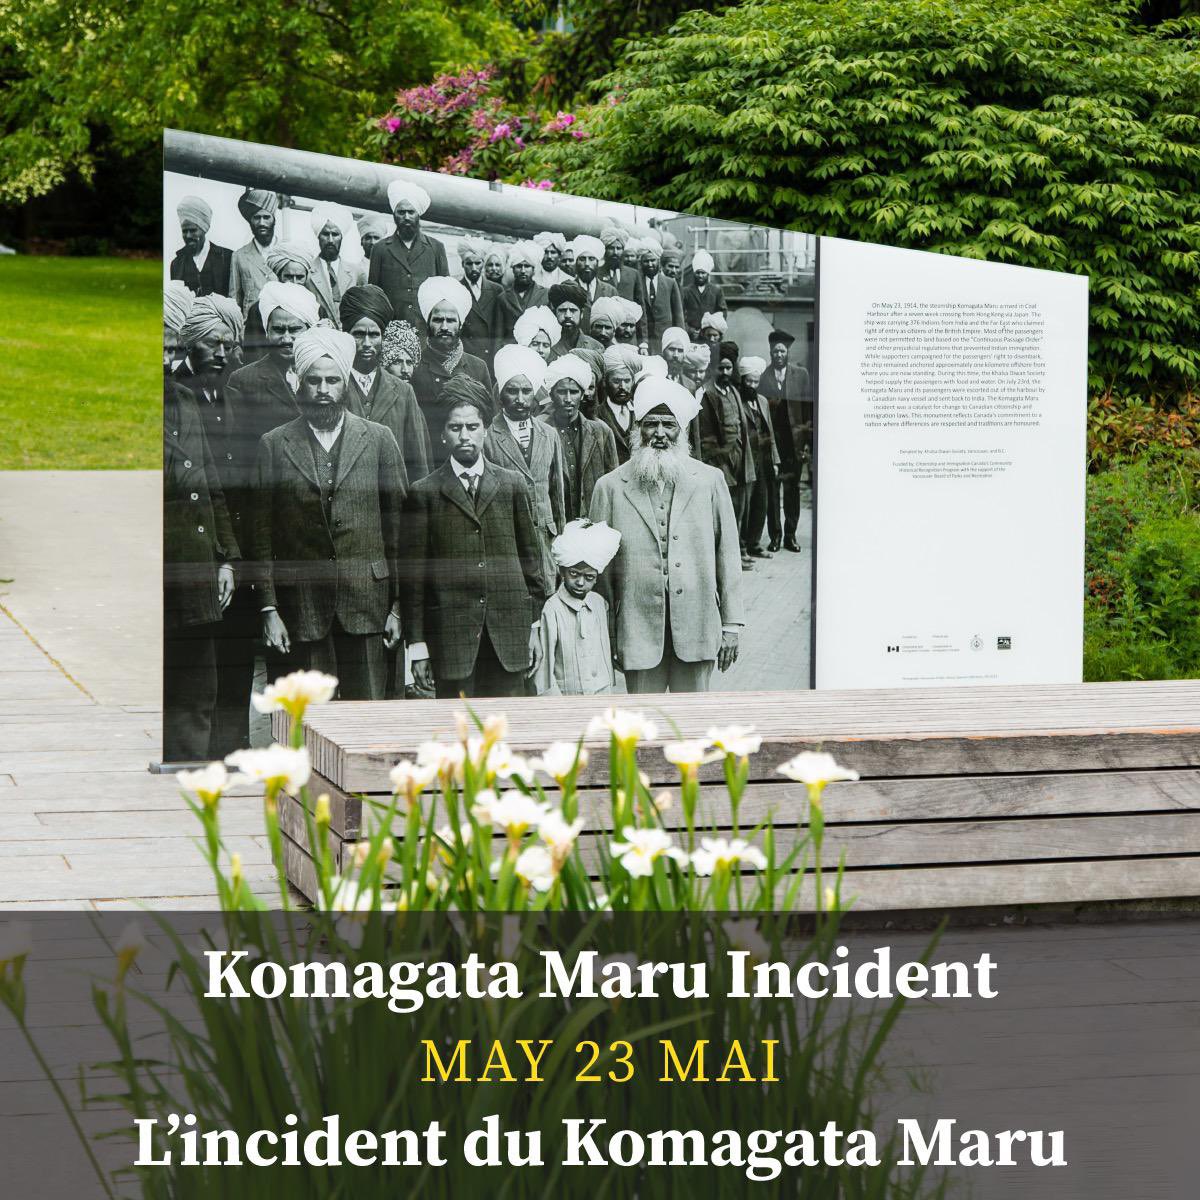 Today marks the Anniversary of the Komagata Maru Incident. 110 years ago, 376 passengers on the Komagata Maru steamship were denied entry due to disciminatory laws, into 🇨🇦 where they sought a better life. #KomagataMaruIncident